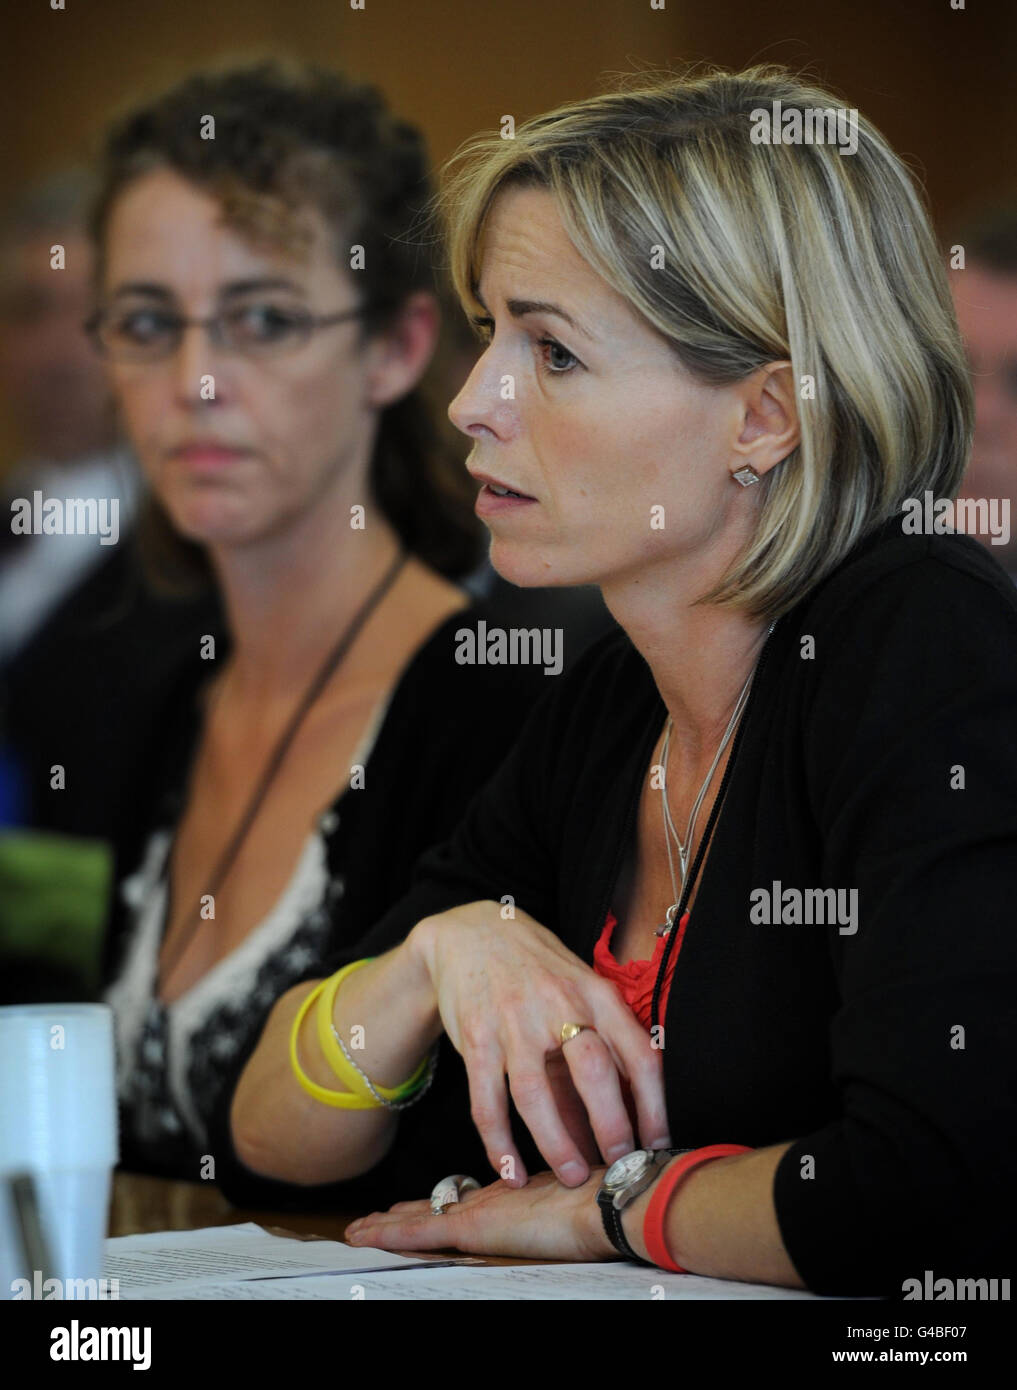 Kate McCann, mother of Madeleine McCann who went missing in 2007 in Portugal attends a parliamentary inquiry into missing persons along with Nicki Durban (left) mother of missing Luke Durbin, at the House of Commons in London. Stock Photo